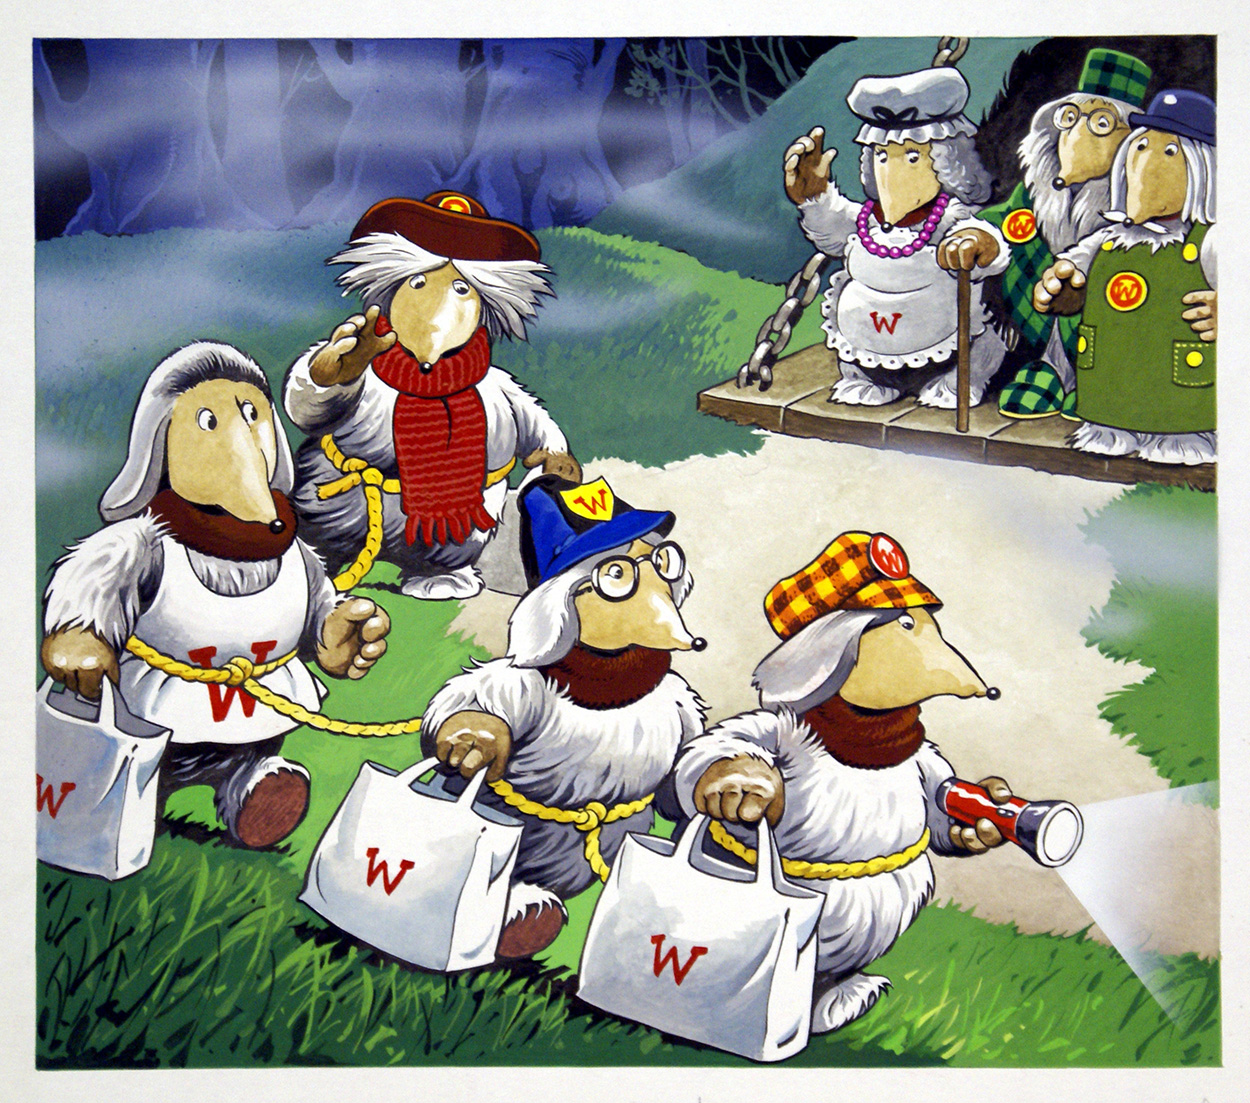 The Wombles: Misty Morning (two boards) (Originals) art by The Wombles (Blasco) Art at The Illustration Art Gallery